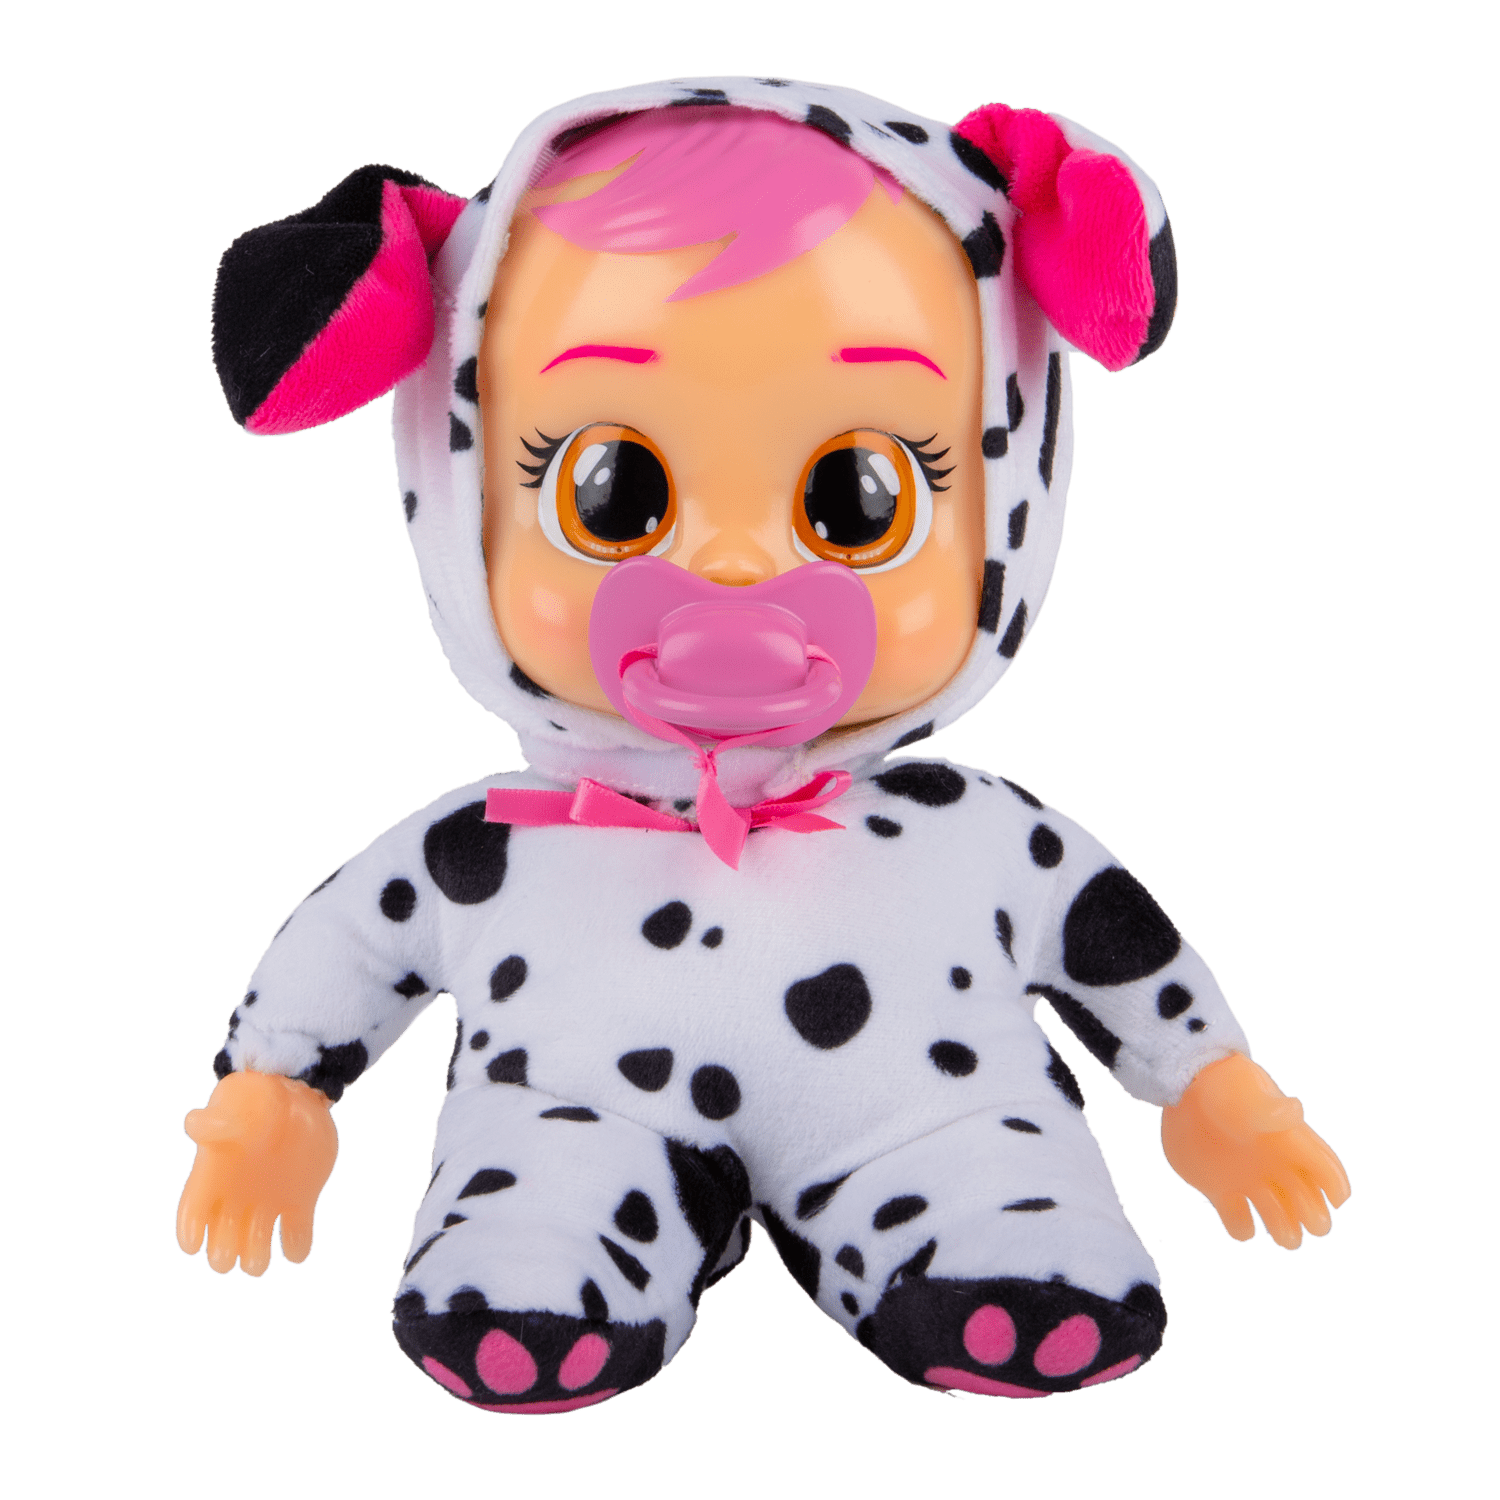 IMC Toys Cry Babies Dotty Doll Dalmatian Baby Toddler Soft Plush Interactive Toy 